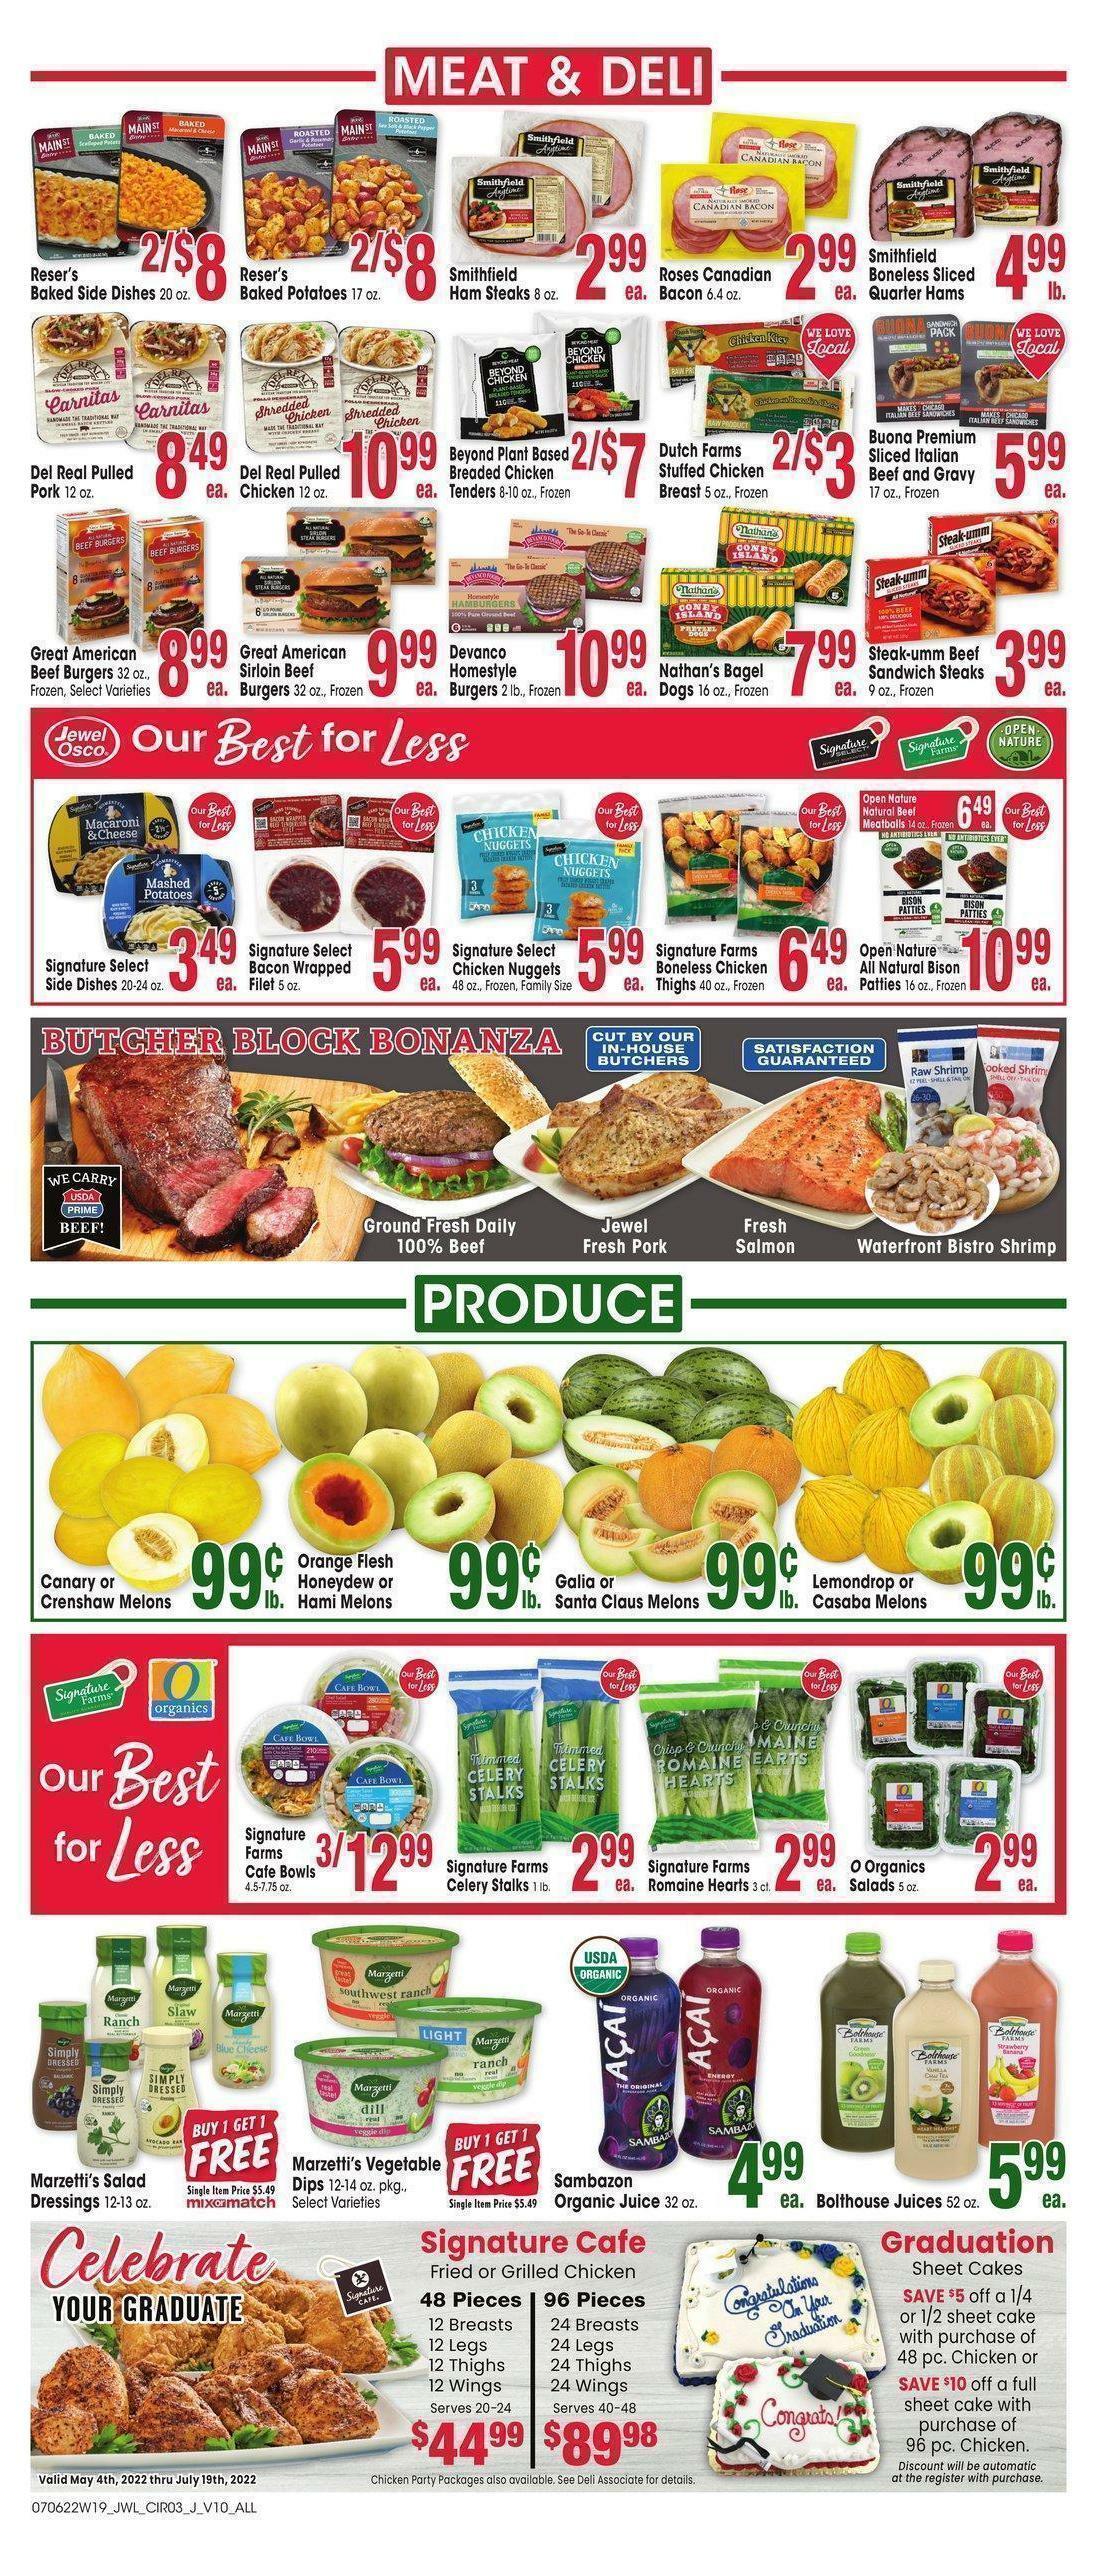 Jewel Osco Weekly Ad from July 6